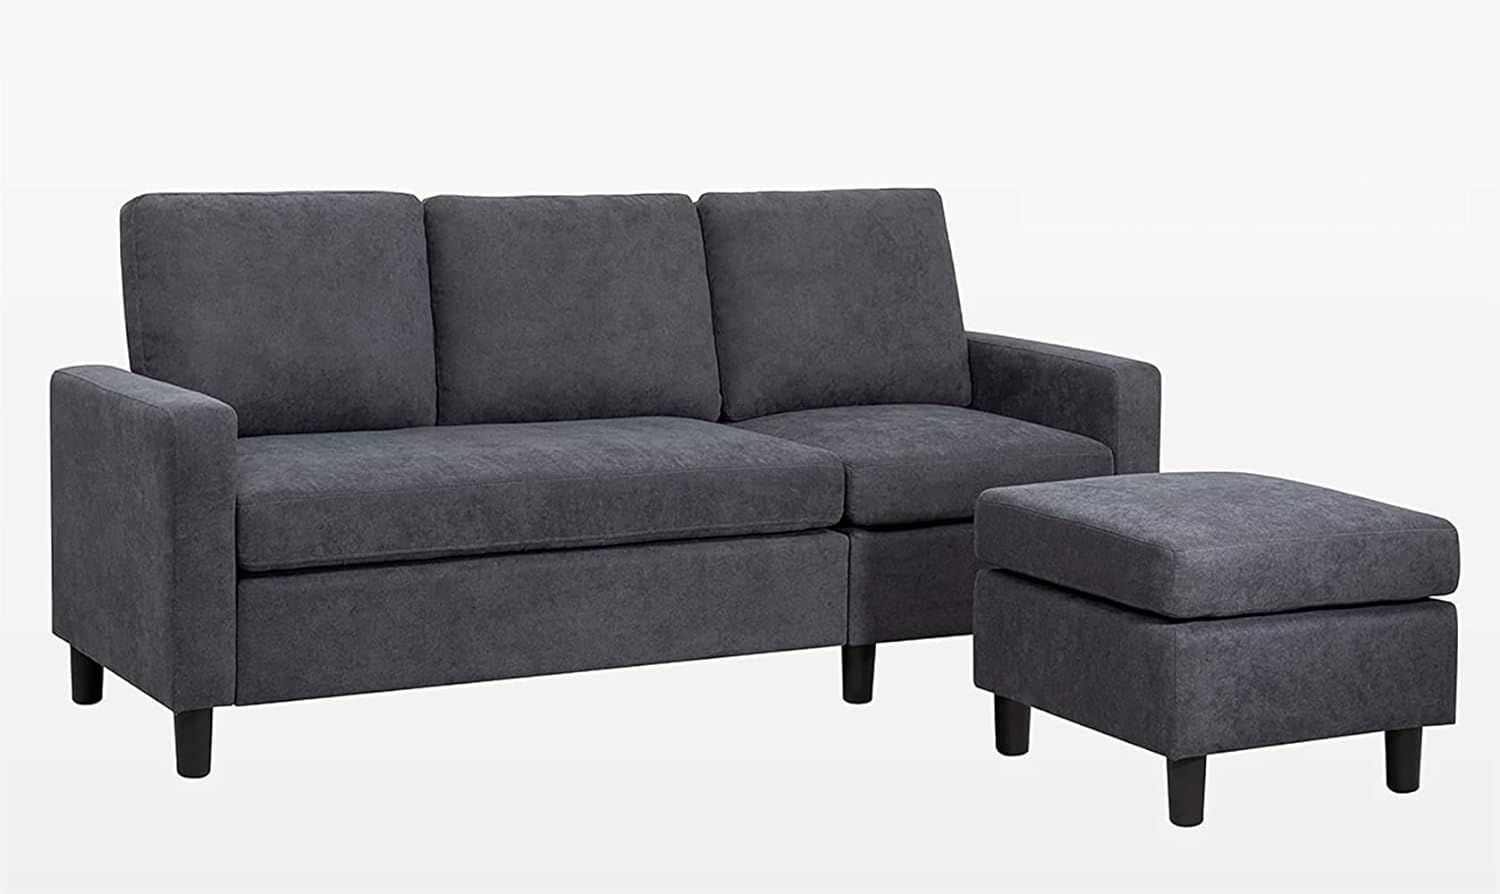 Convertible Modular Sofa 3 Seat L Shaped Sofa, India | Ubuy Throughout 3 Seat L Shaped Sofas In Black (View 14 of 15)